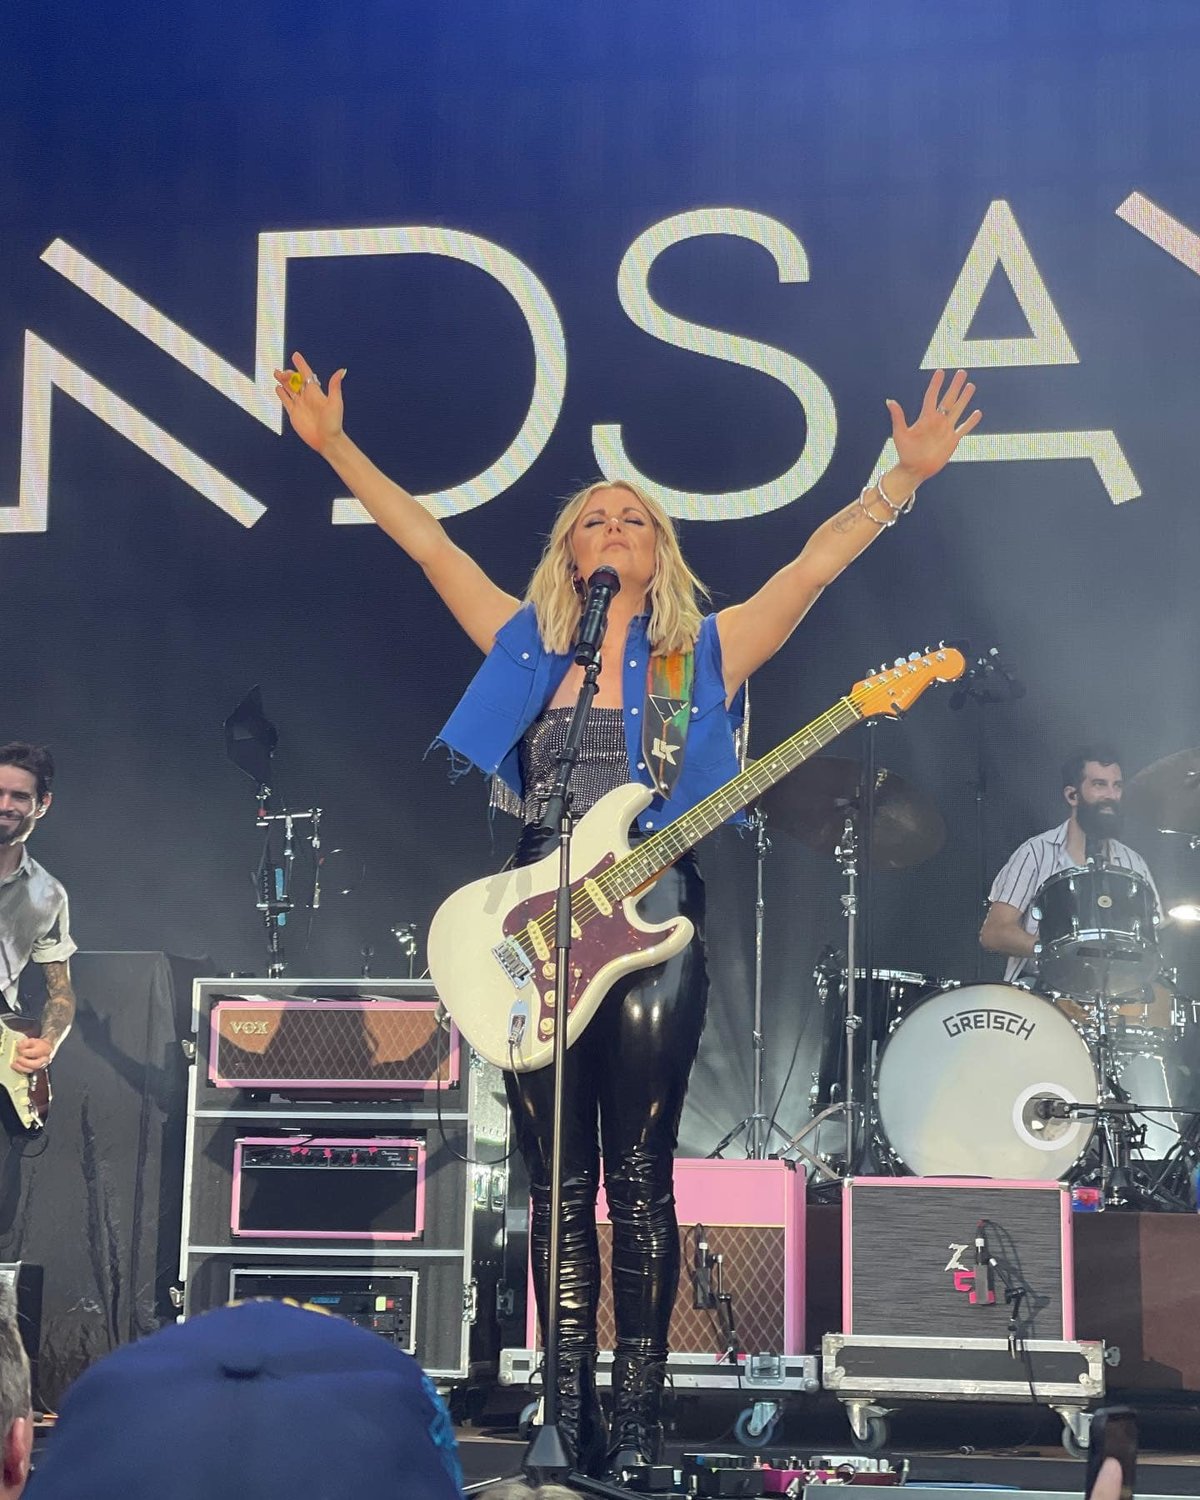 Lindsay Ell has made her mark in country music. Her debut album The Project,  debuted at No. 1 on the Country Album Sales Chart and was named Billboard’s “Best Country Album” in 2017. Her first No. 1 with Brantley Gilbert, “What Happens In A Small Town” made her the first Canadian artist to hit No. 1 since Emerson Drive’s “Moments” in 2007 and the first Canadian woman to reach the top of the charts since Terri Clark with “I Just Wanna Be Mad” in 2003.